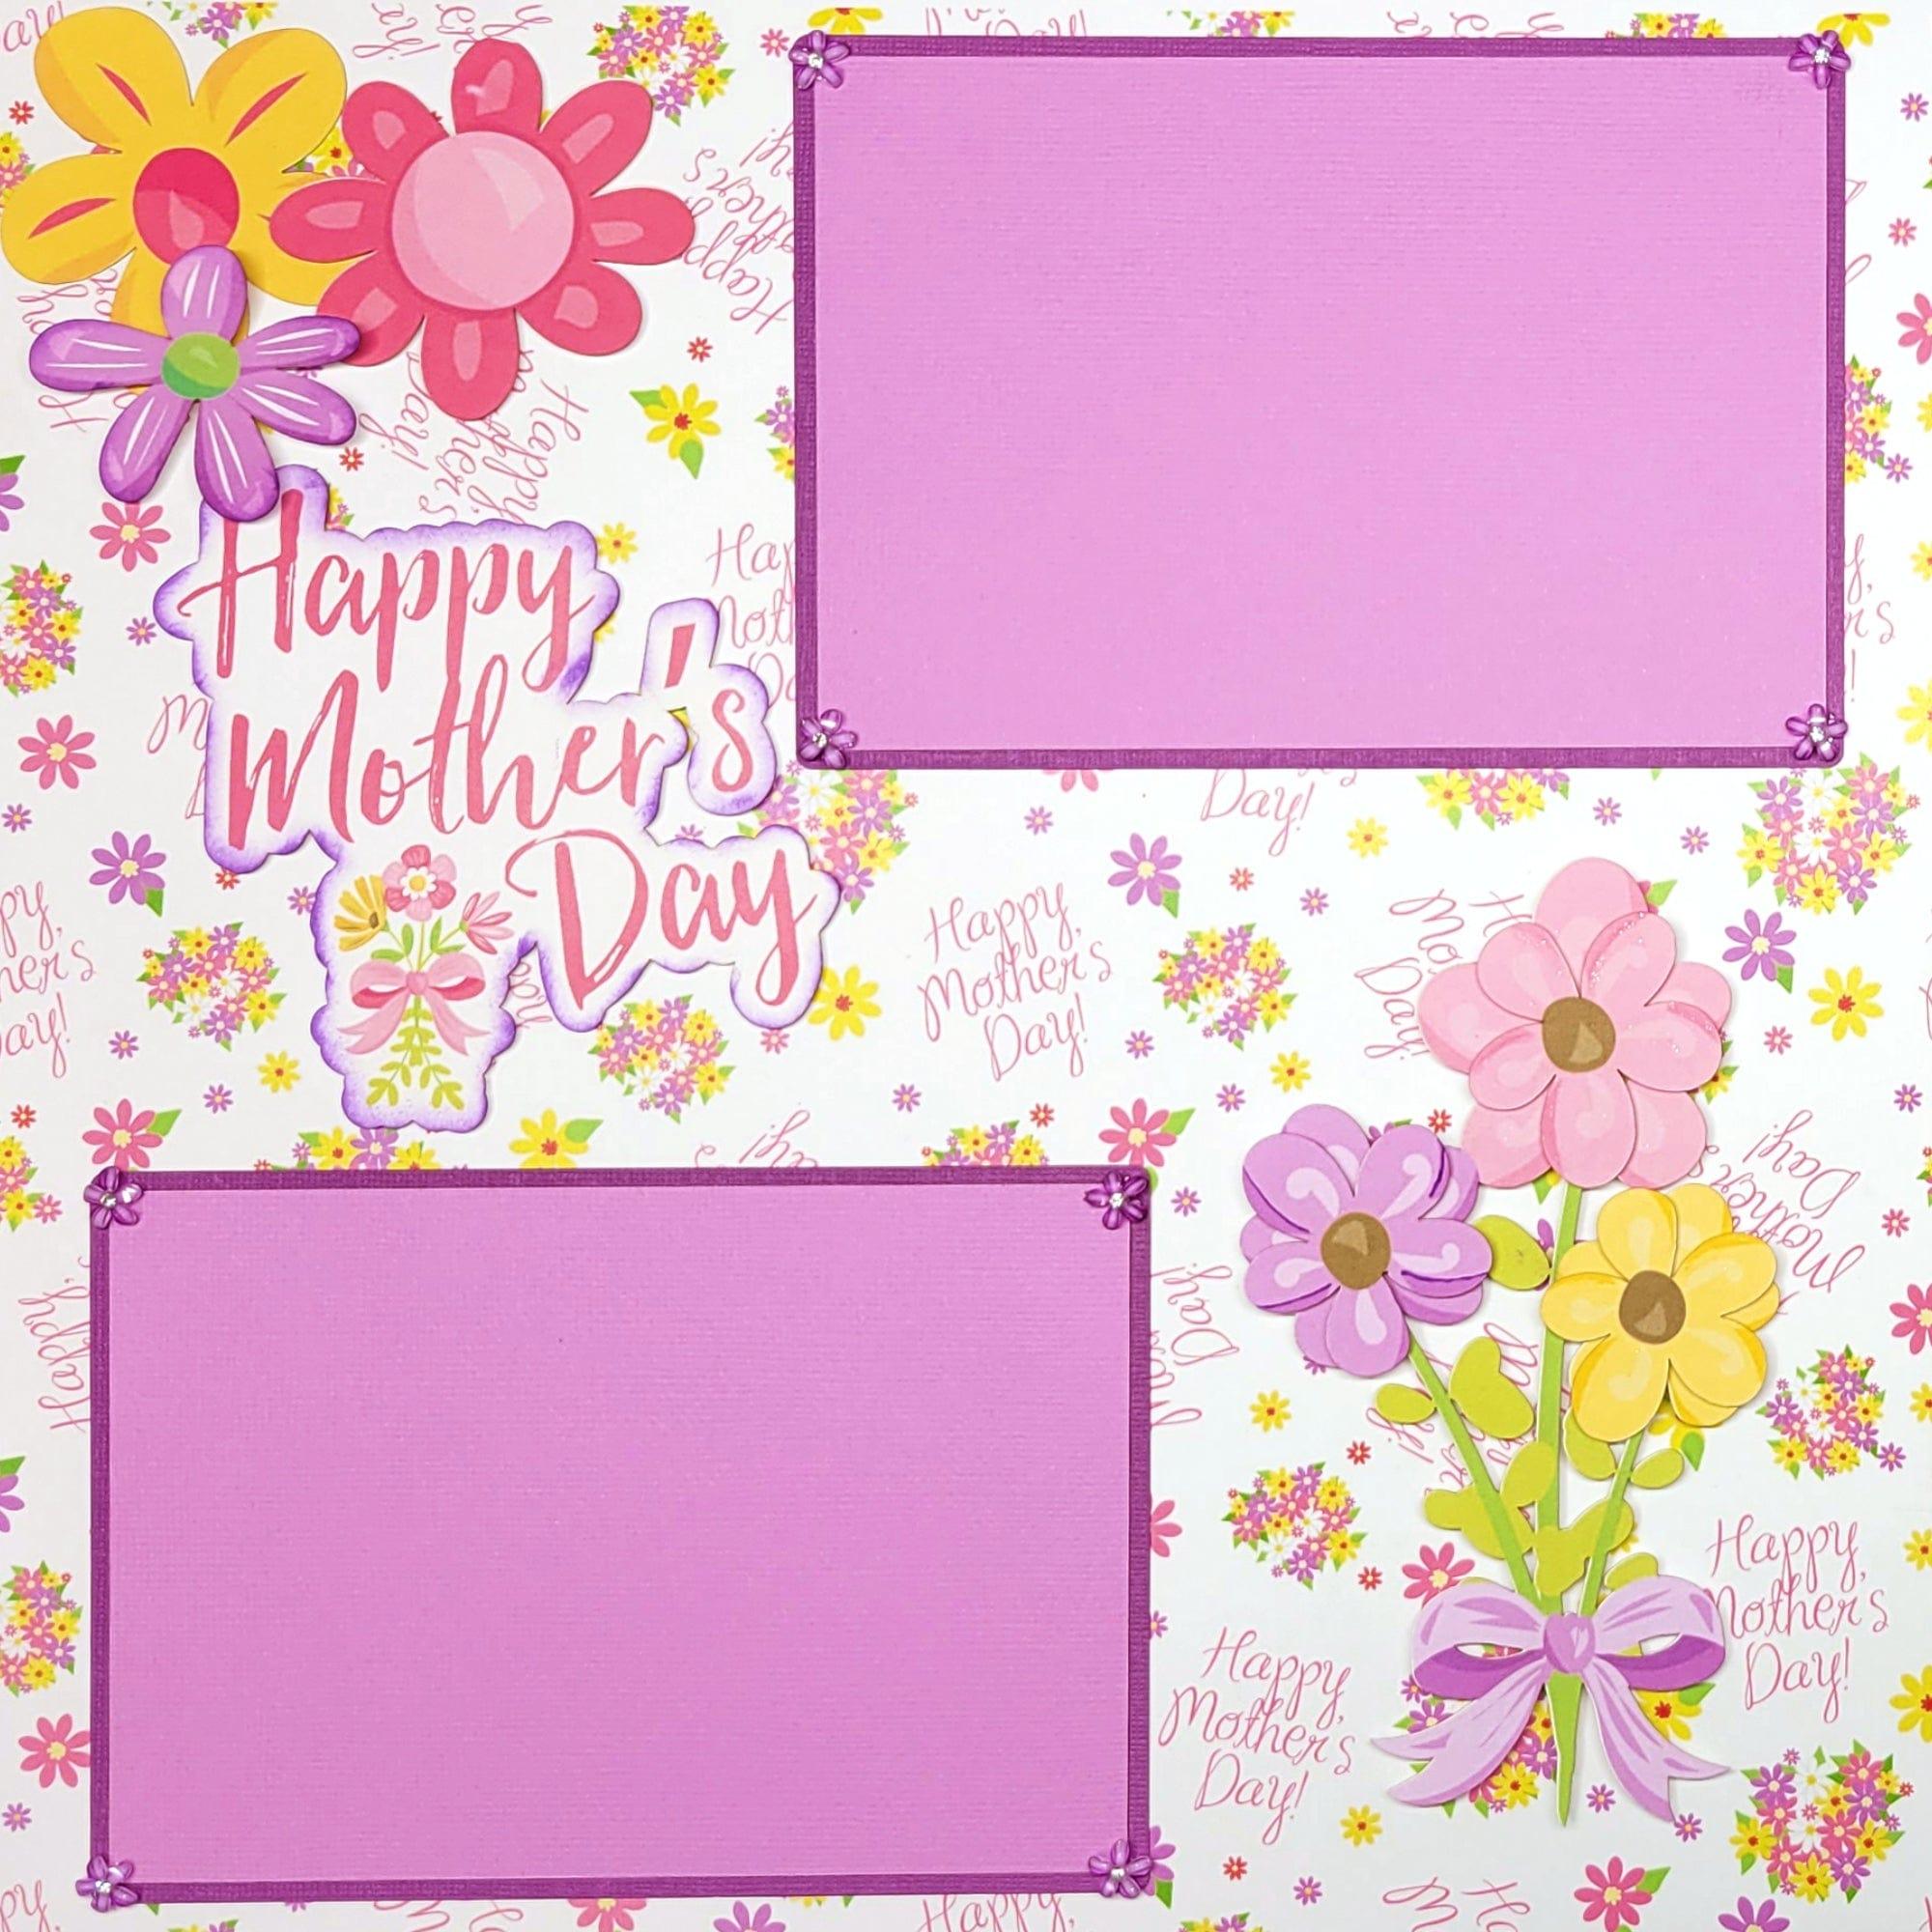 Happy Mother's Day (2) - 12 x 12 Pages, Fully-Assembled & Hand-Embellished Dimensional Scrapbook Premade by SSC Designs - Scrapbook Supply Companies